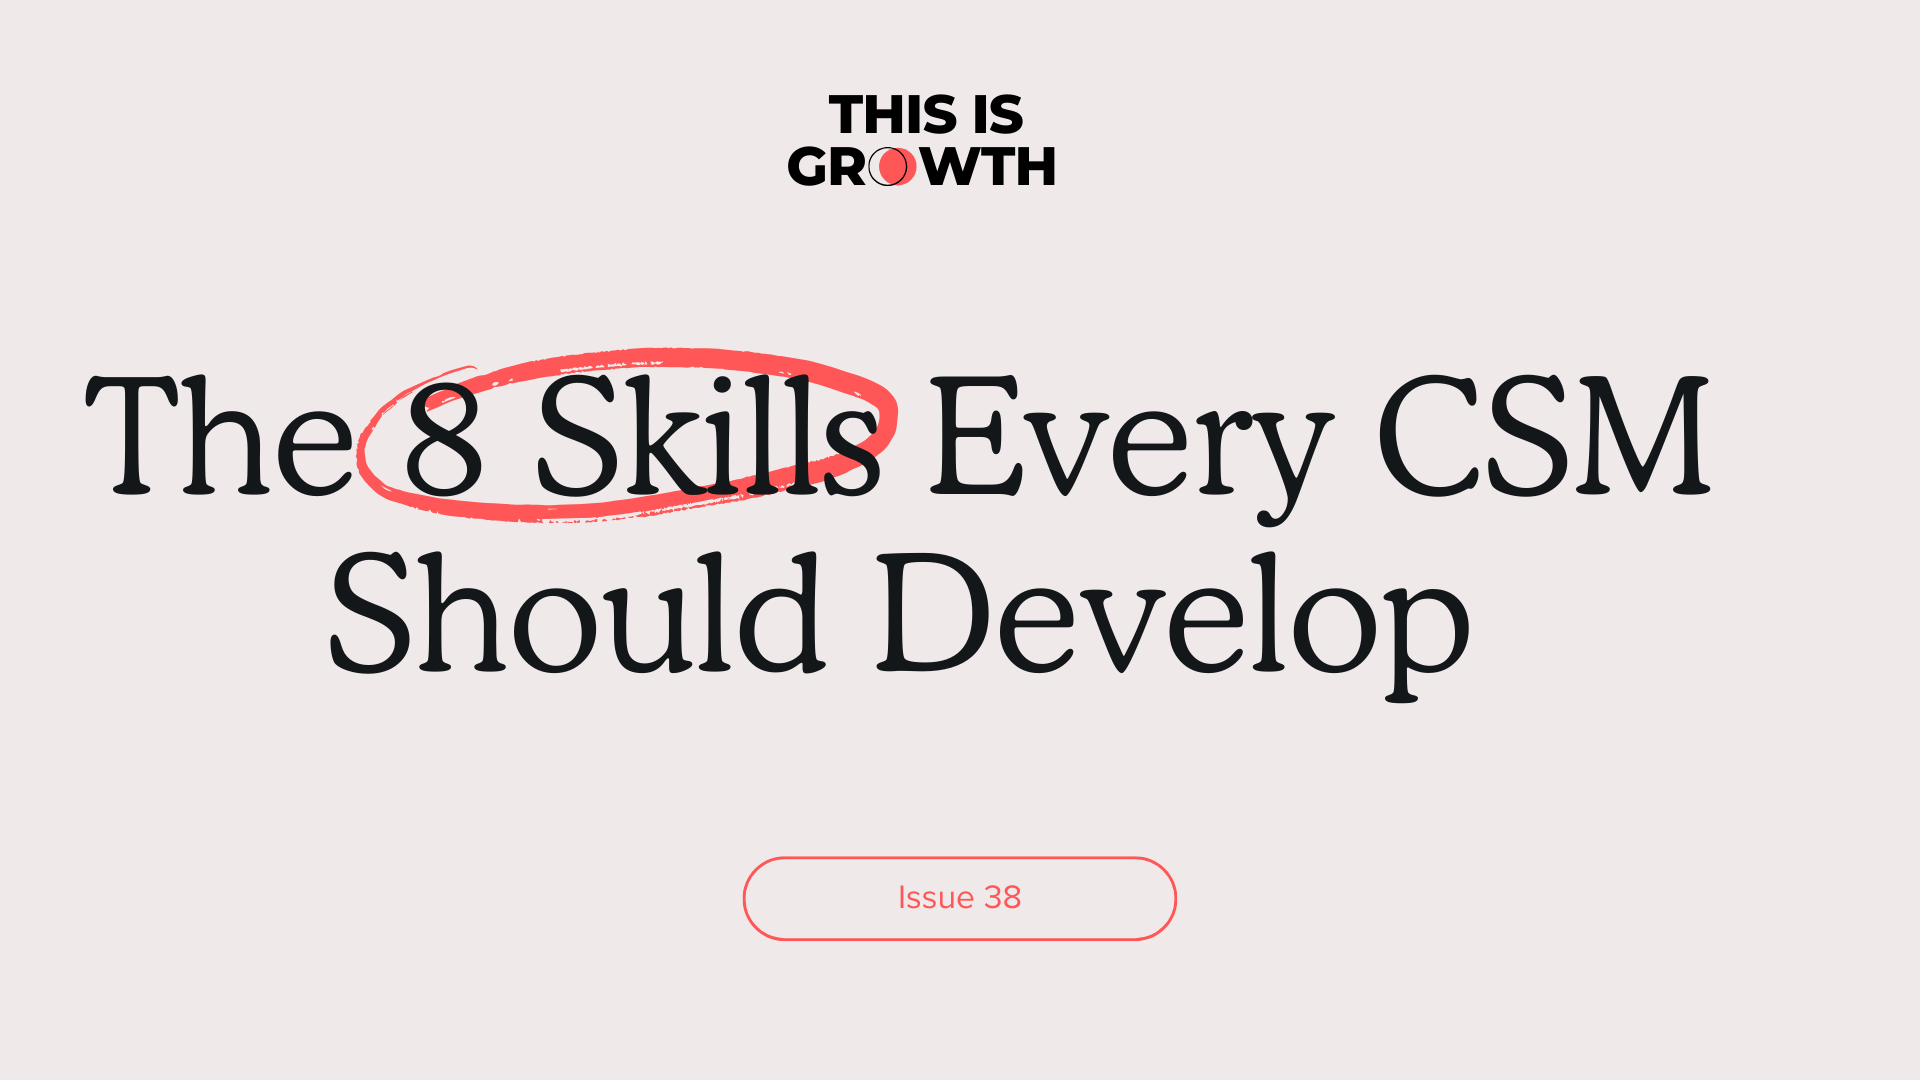 The 8 Skills Every CSM Should Develop